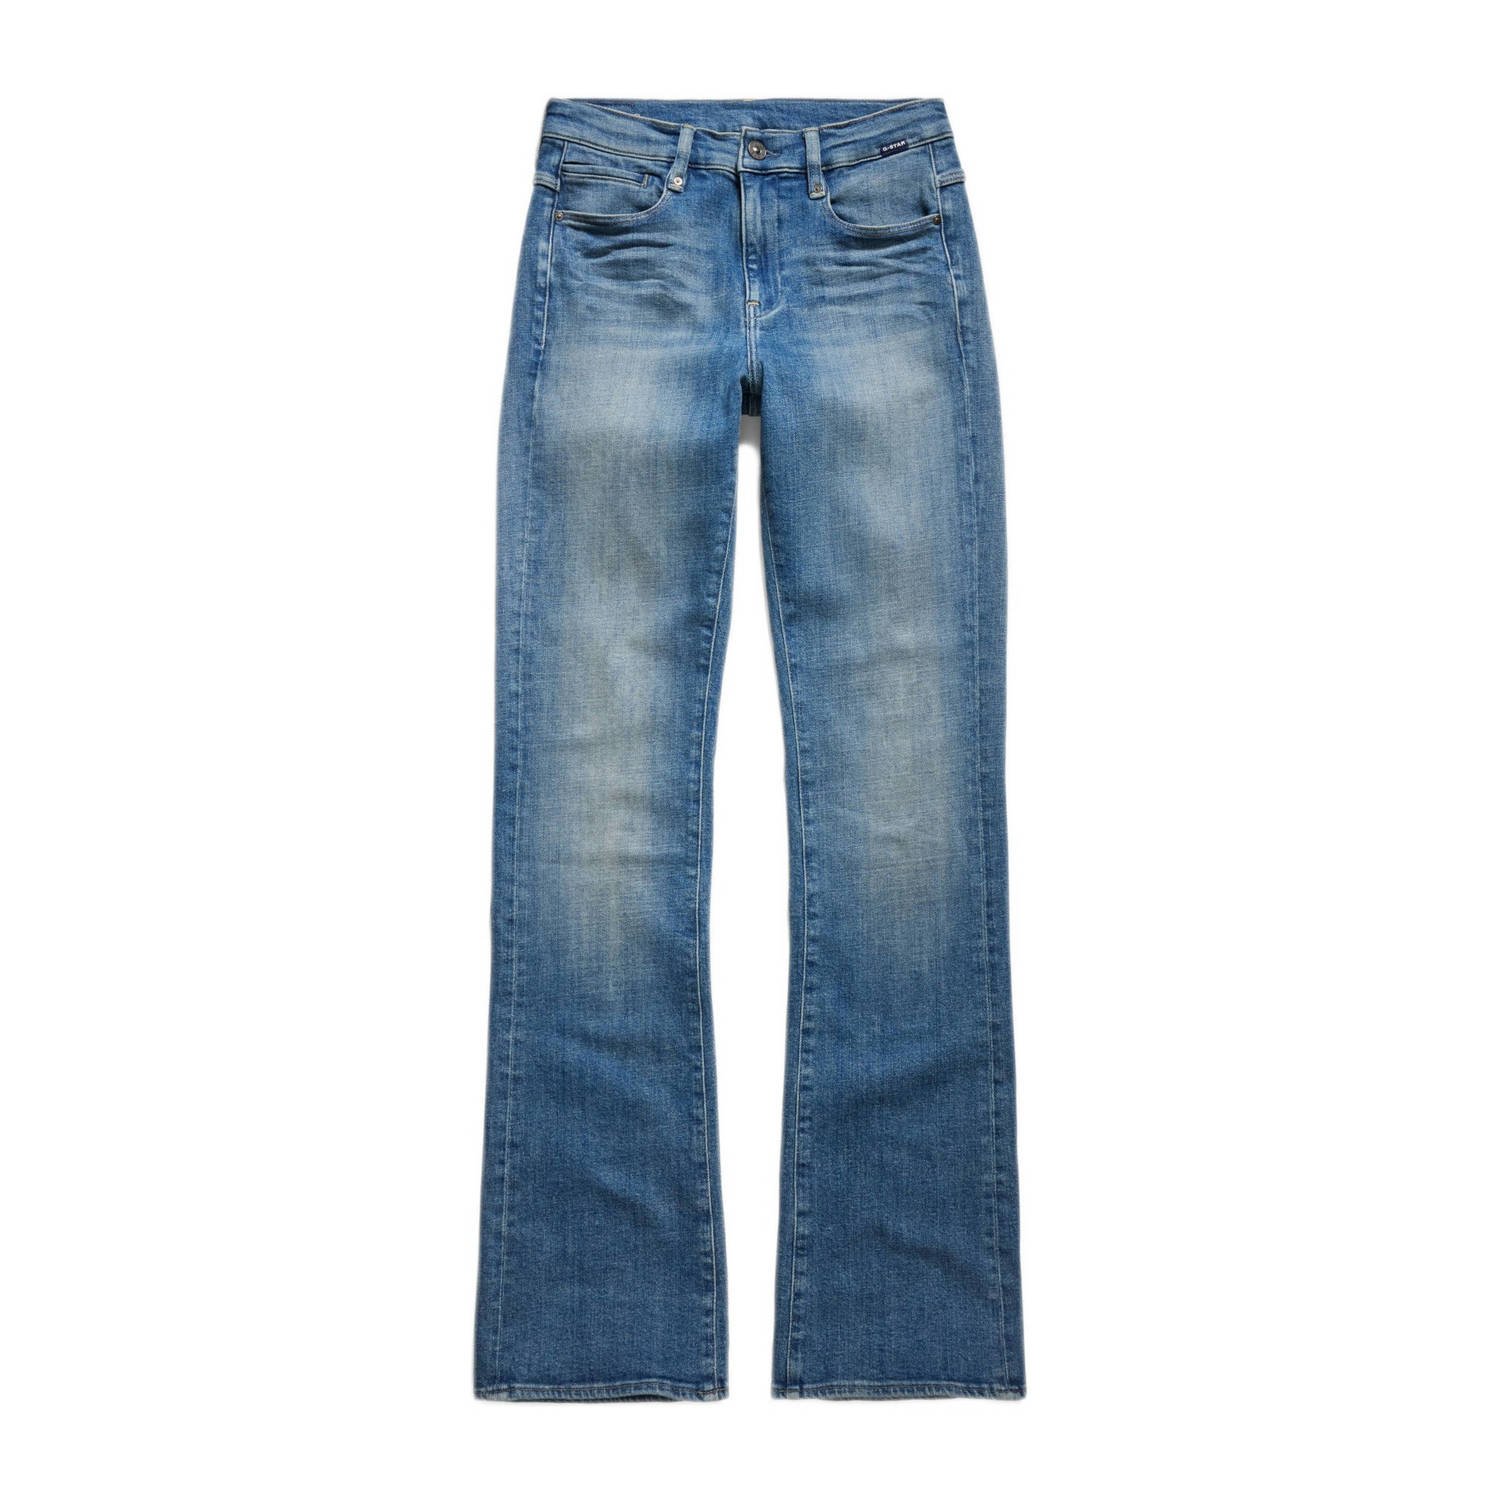 G-Star RAW Noxer bootcut jeans antique faded lago blue